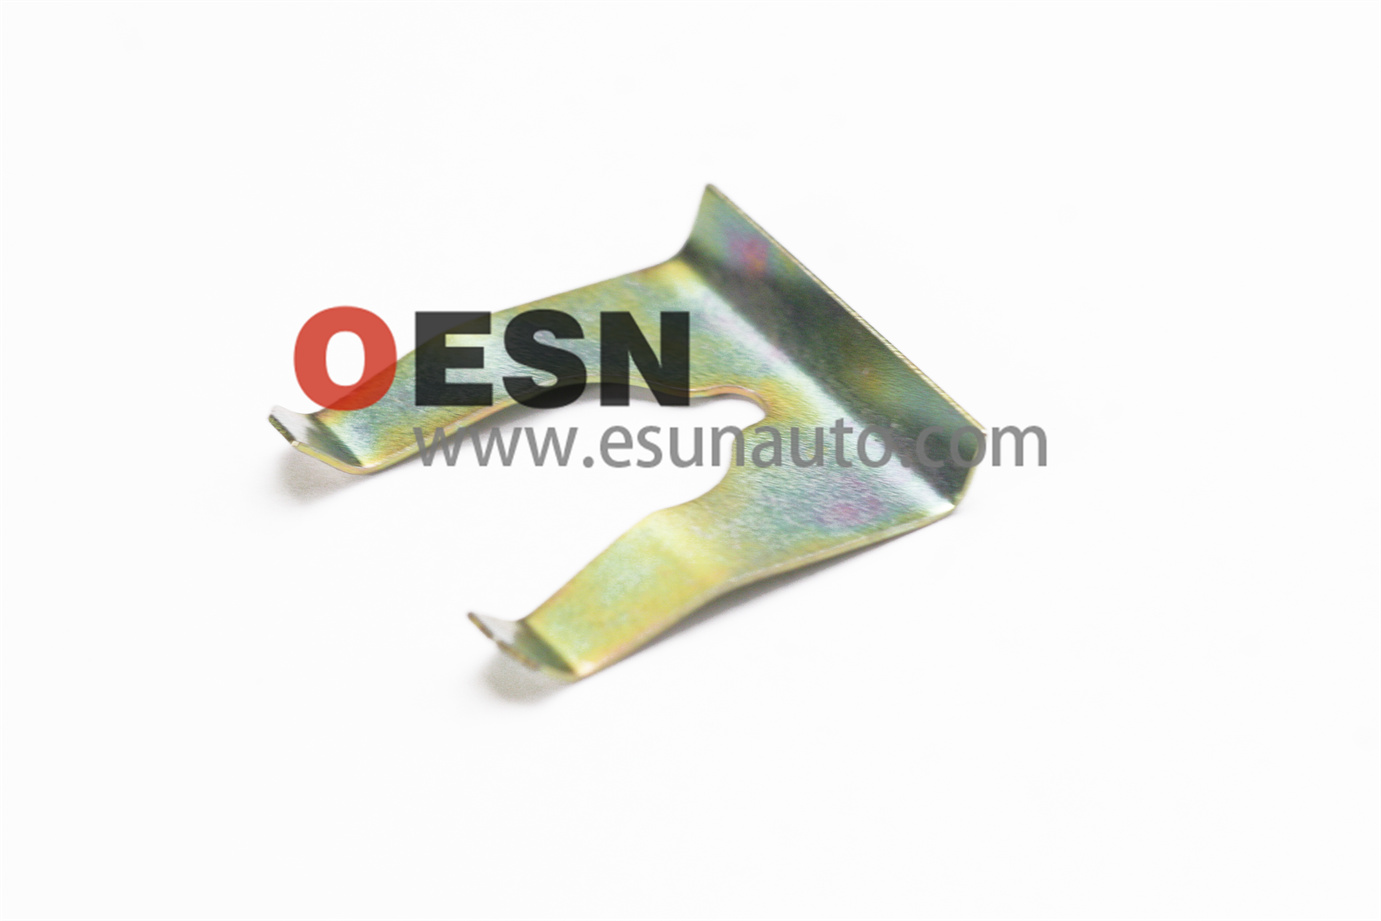 Transmission cable fixture small  ESN70024  OEM8970114480